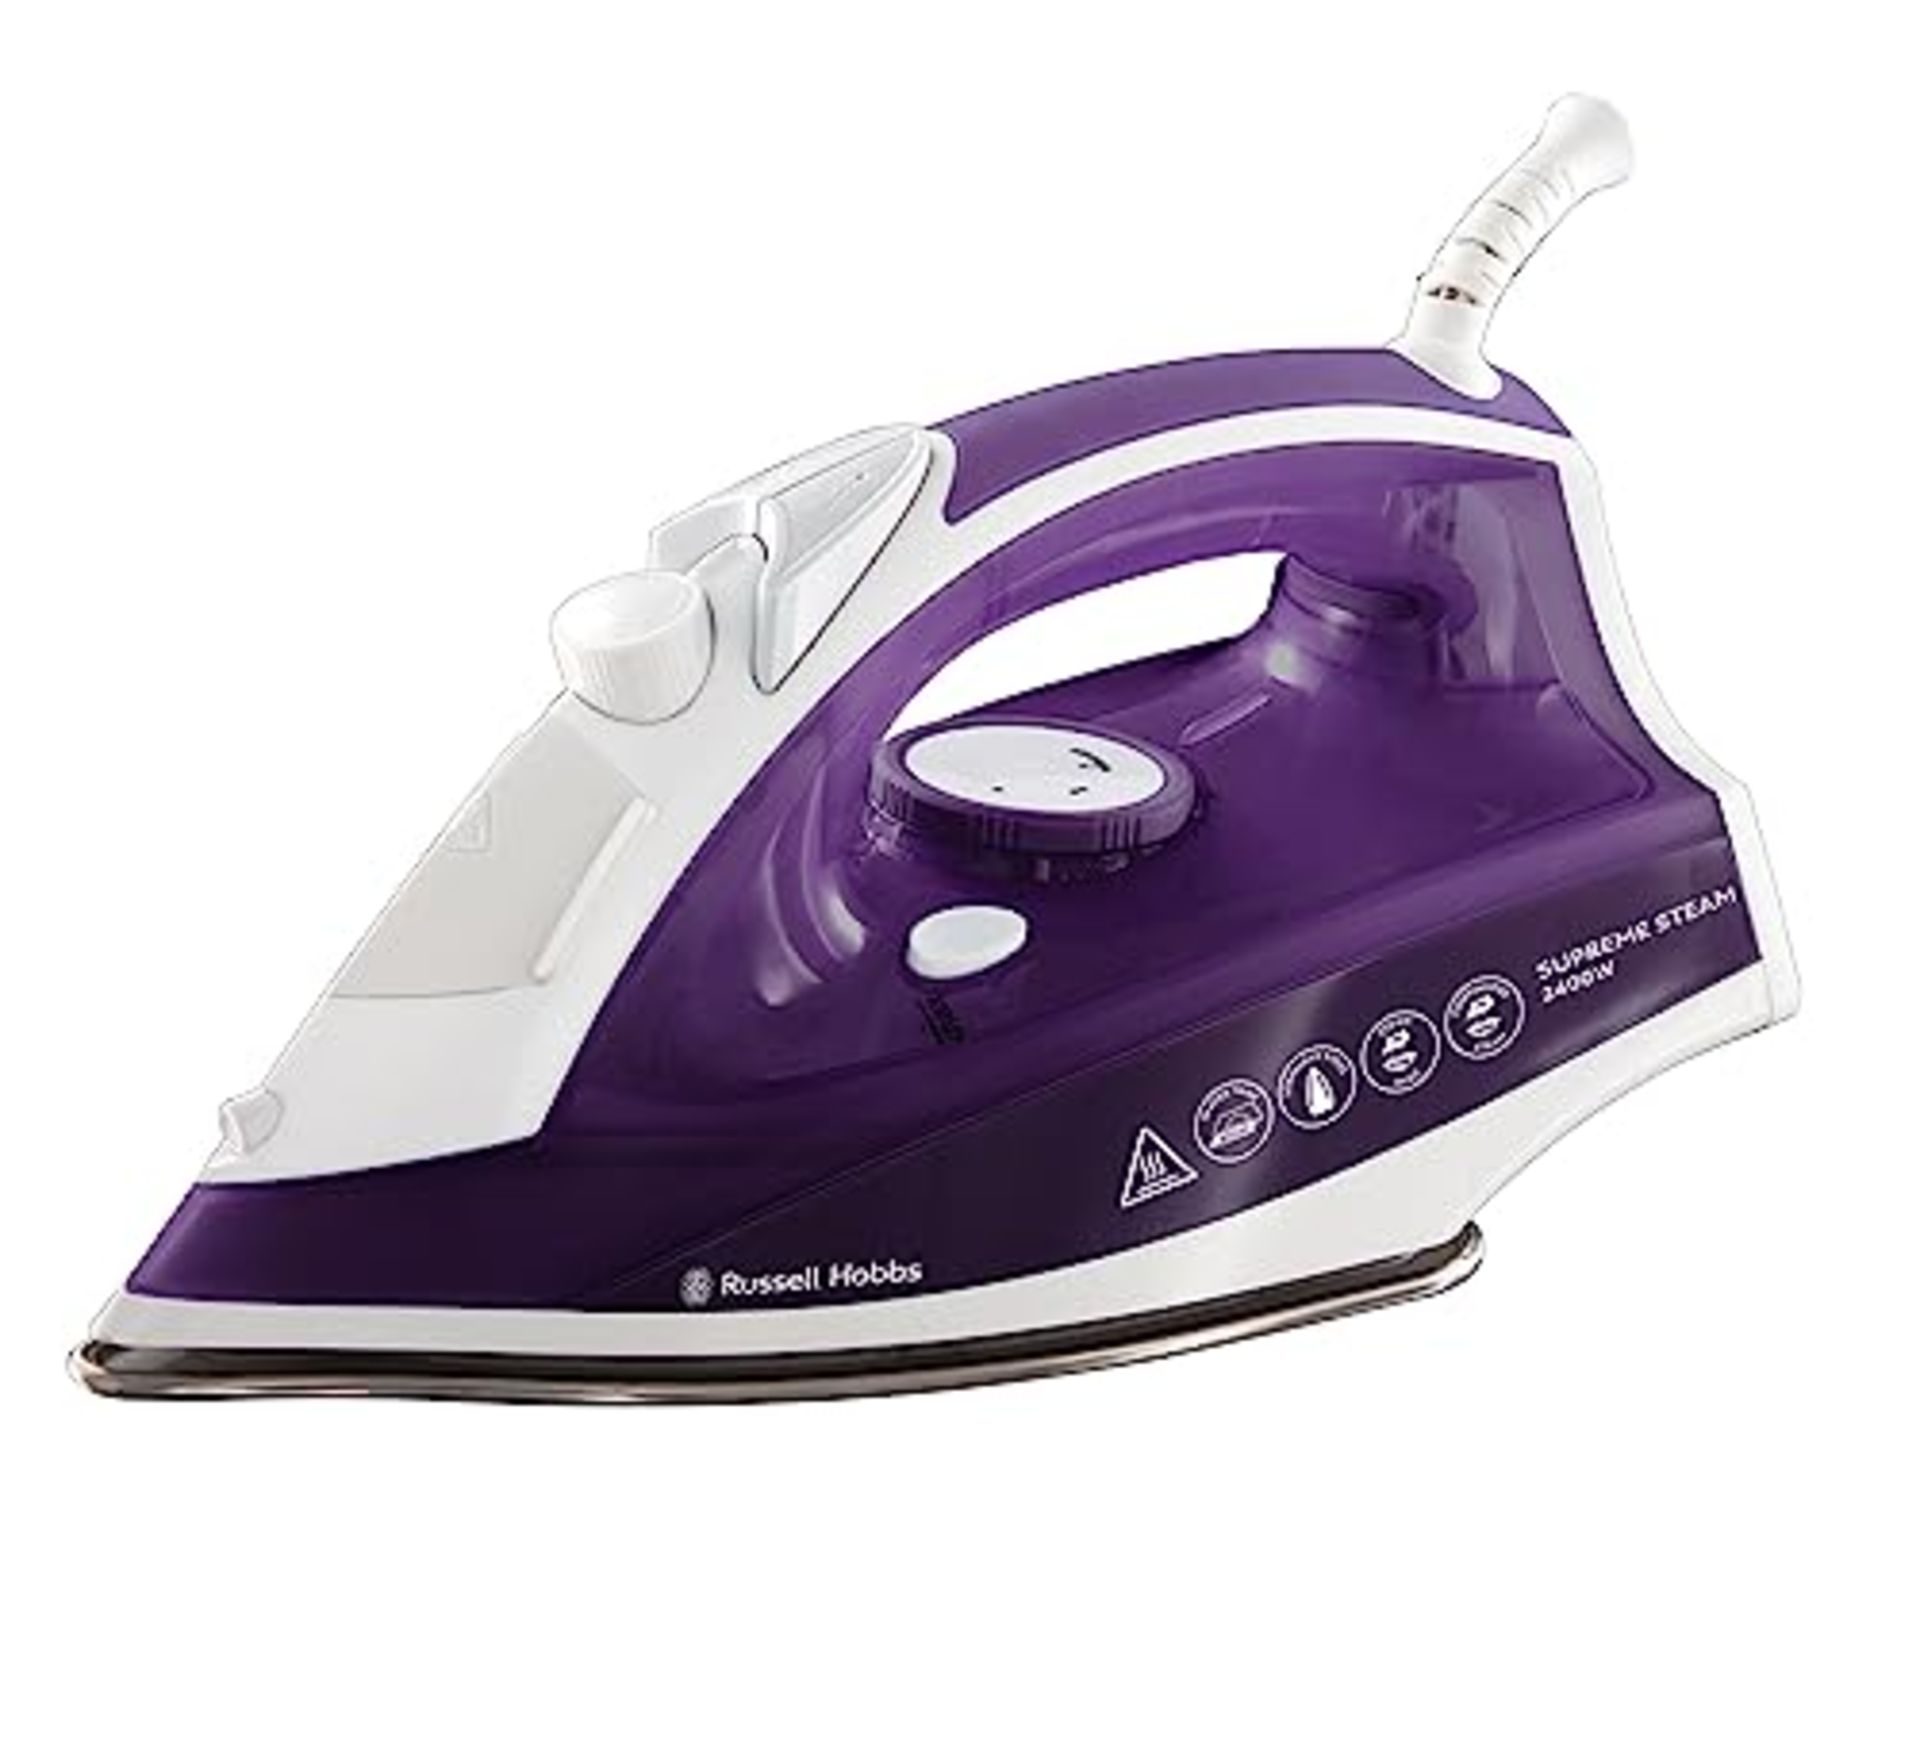 Russell Hobbs Supreme Steam Iron, Powerful vertical steam function, Non-stick stainles